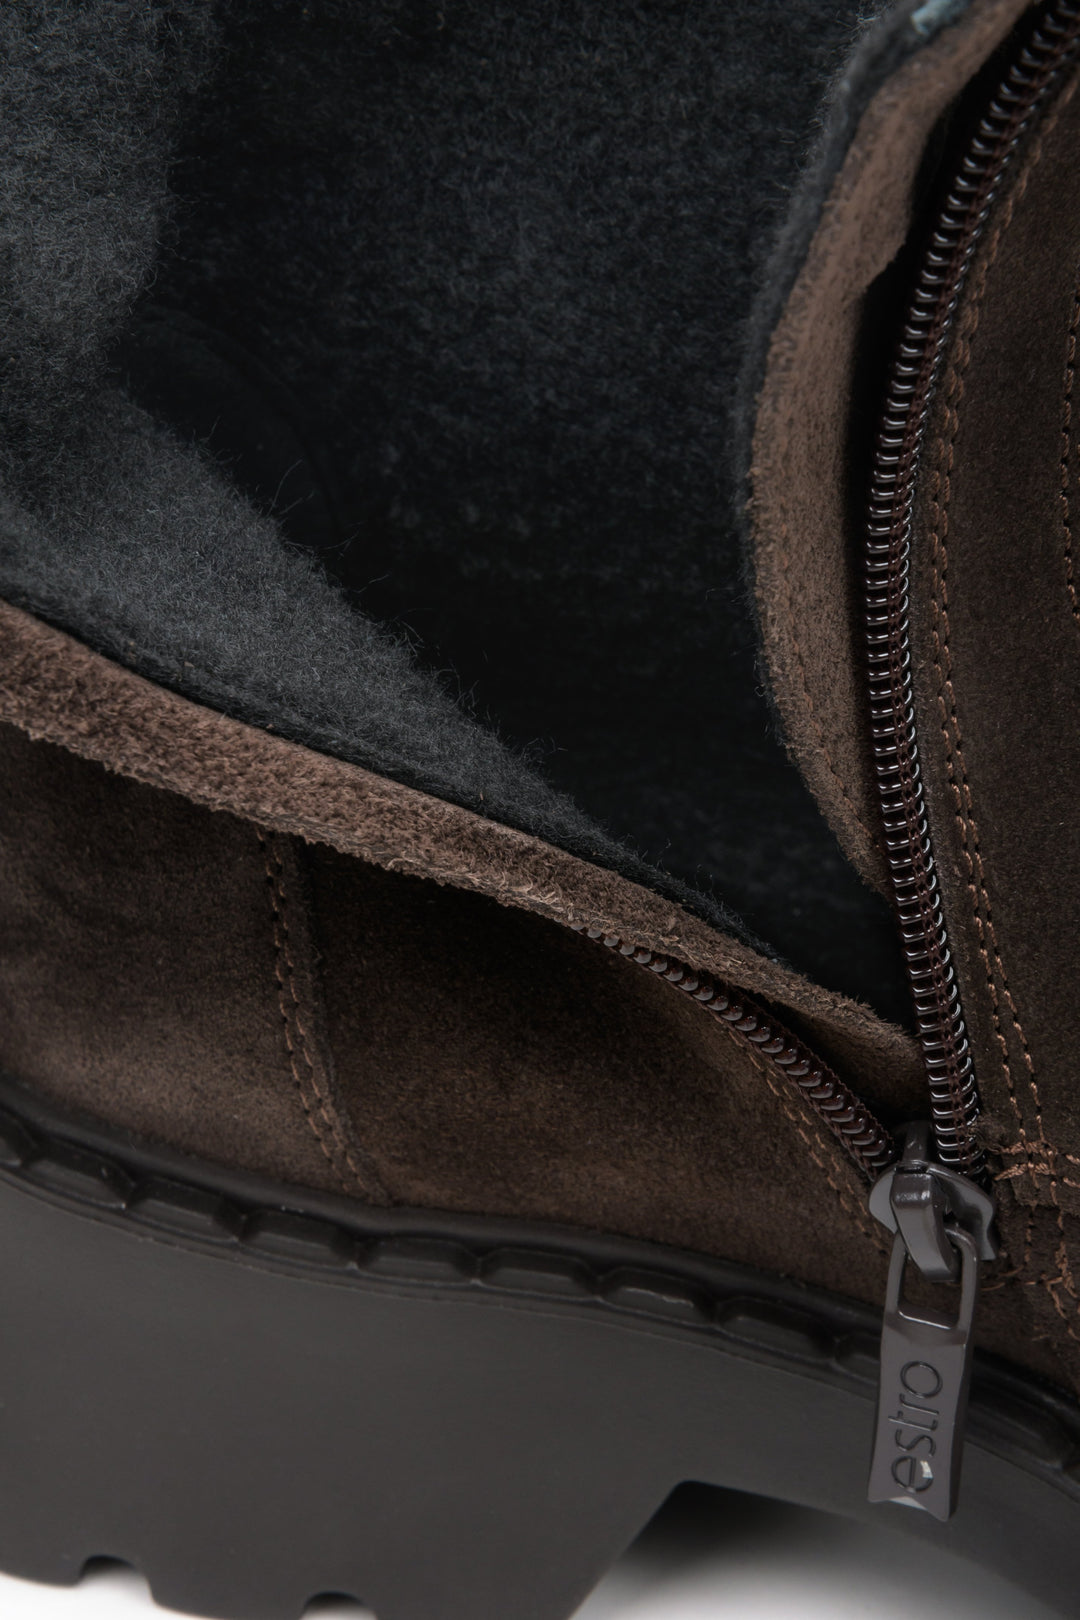 Women's dark brown velour work boots by Estro - close-up on the soft insole of the shoe.